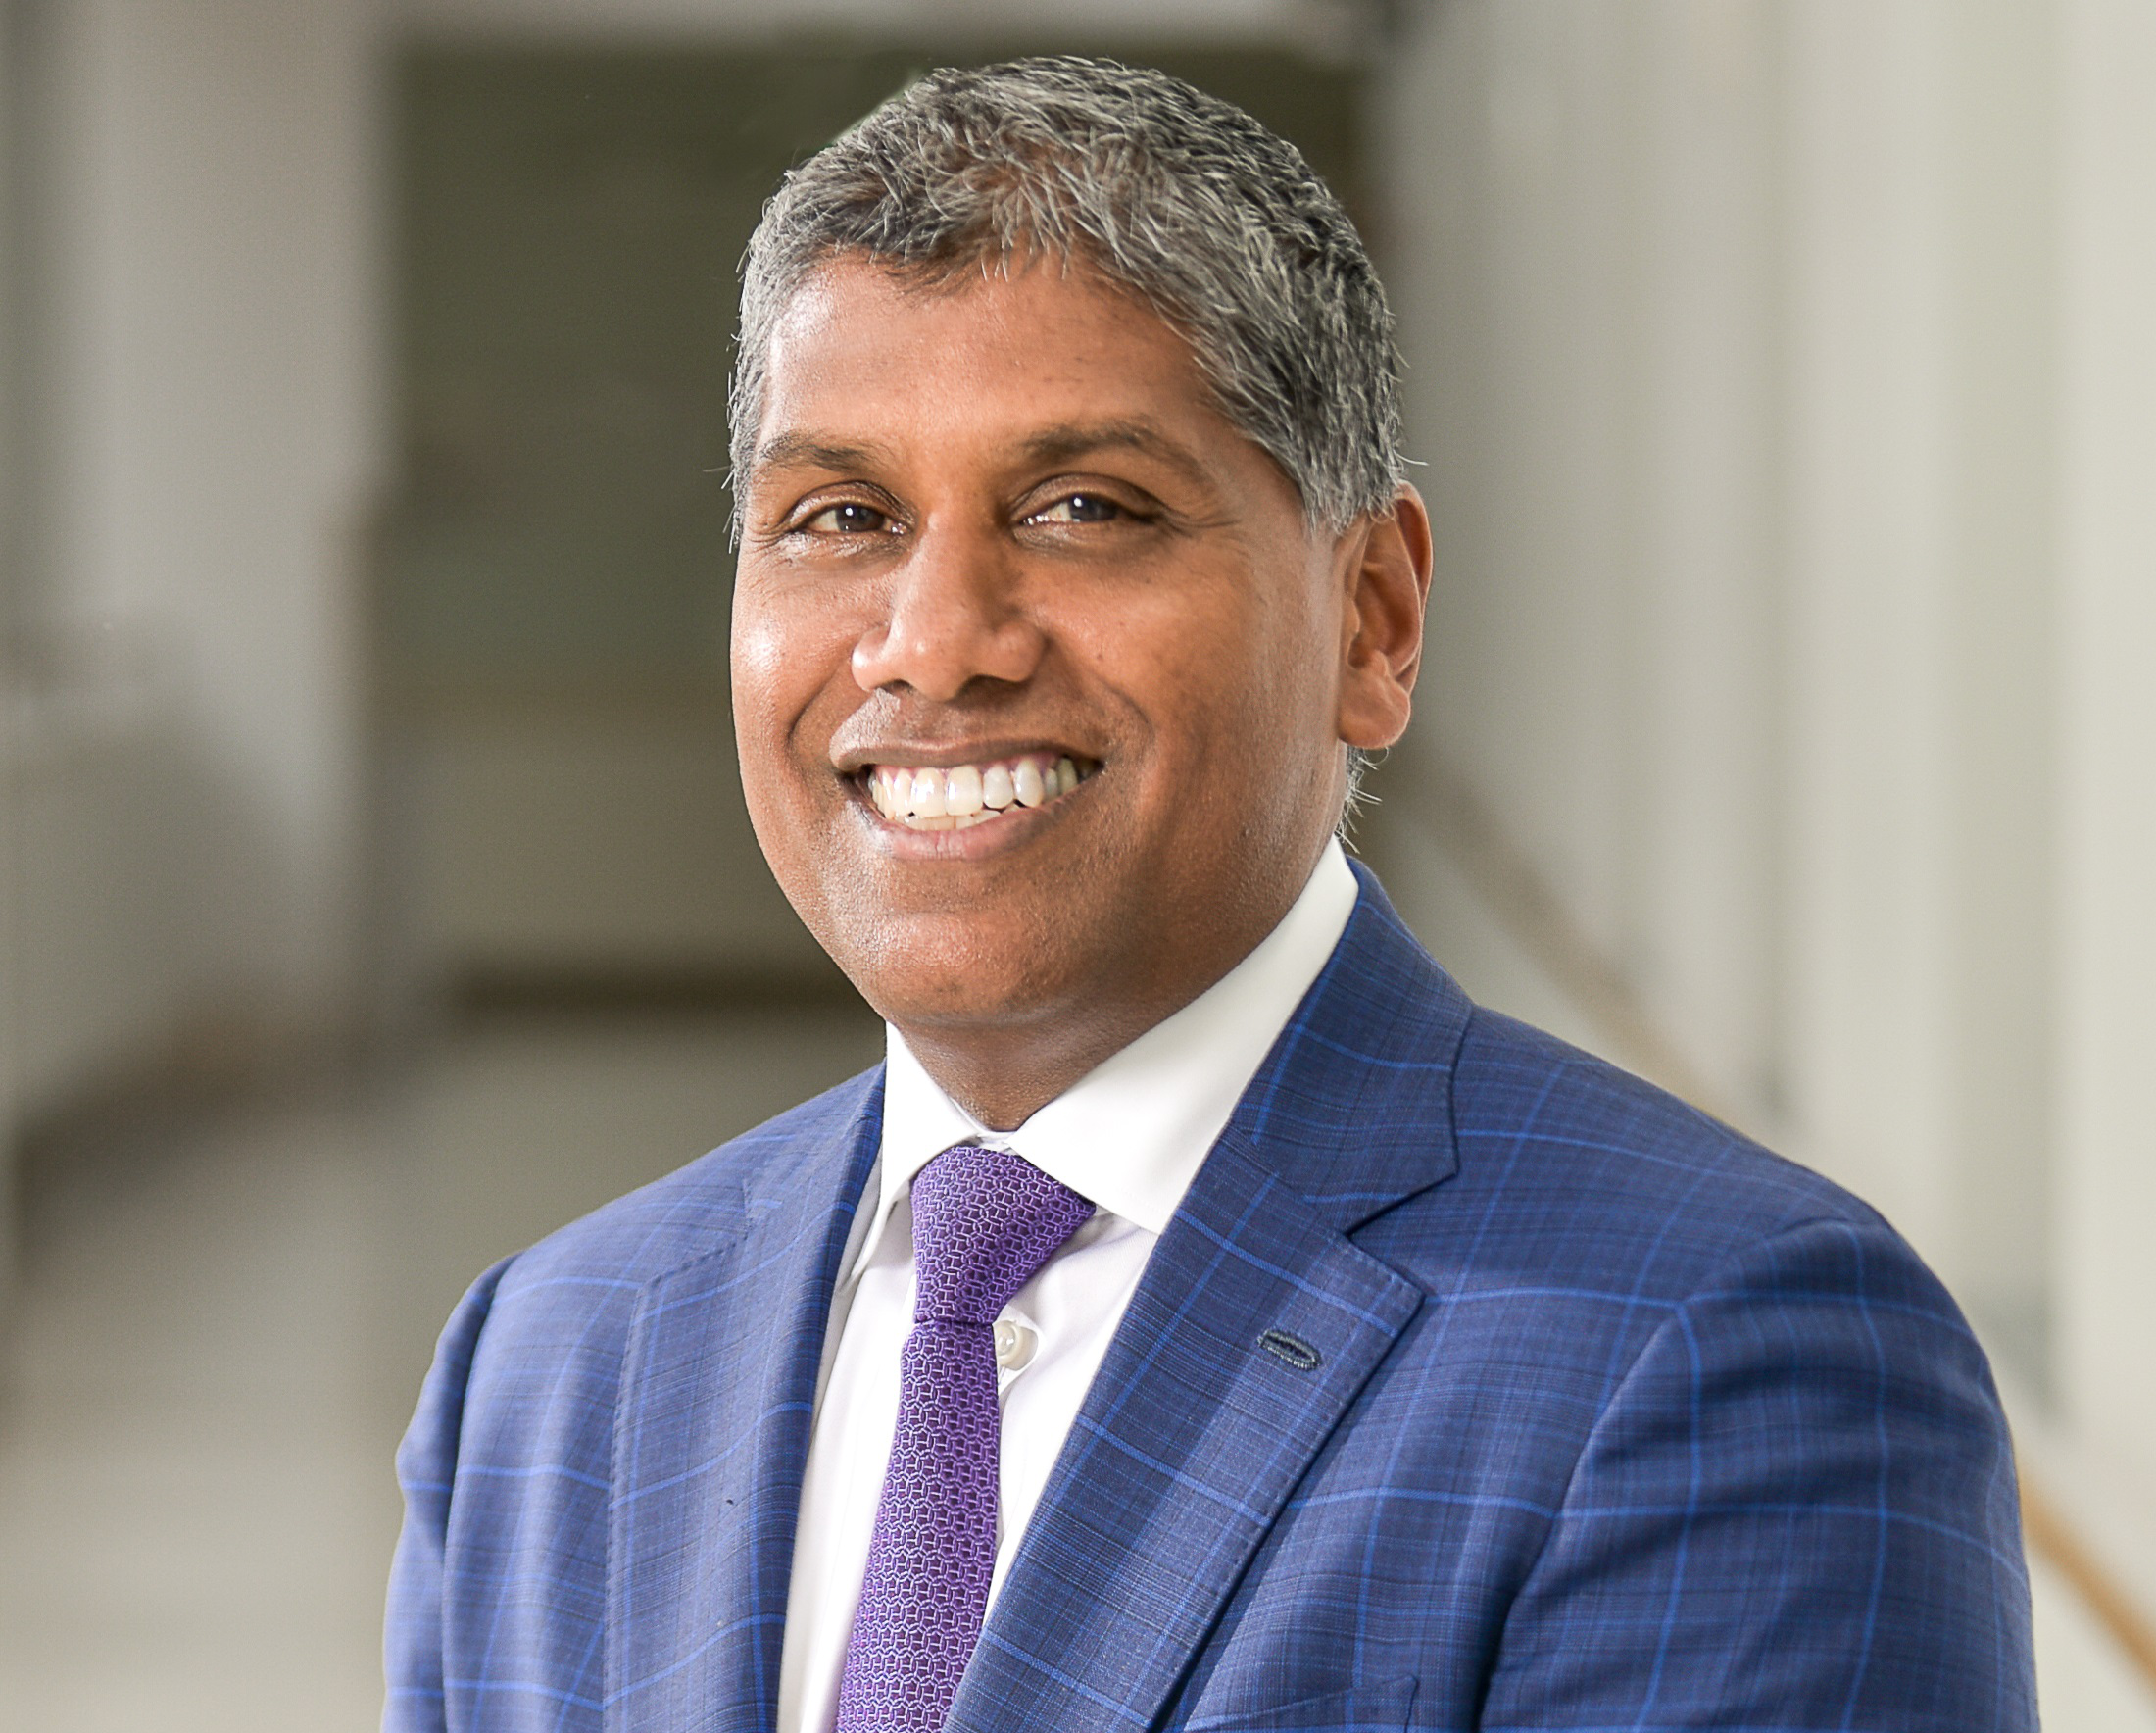 CEO Dr. Mohan Suntha: How UMMS has coped with the COVID pandemic